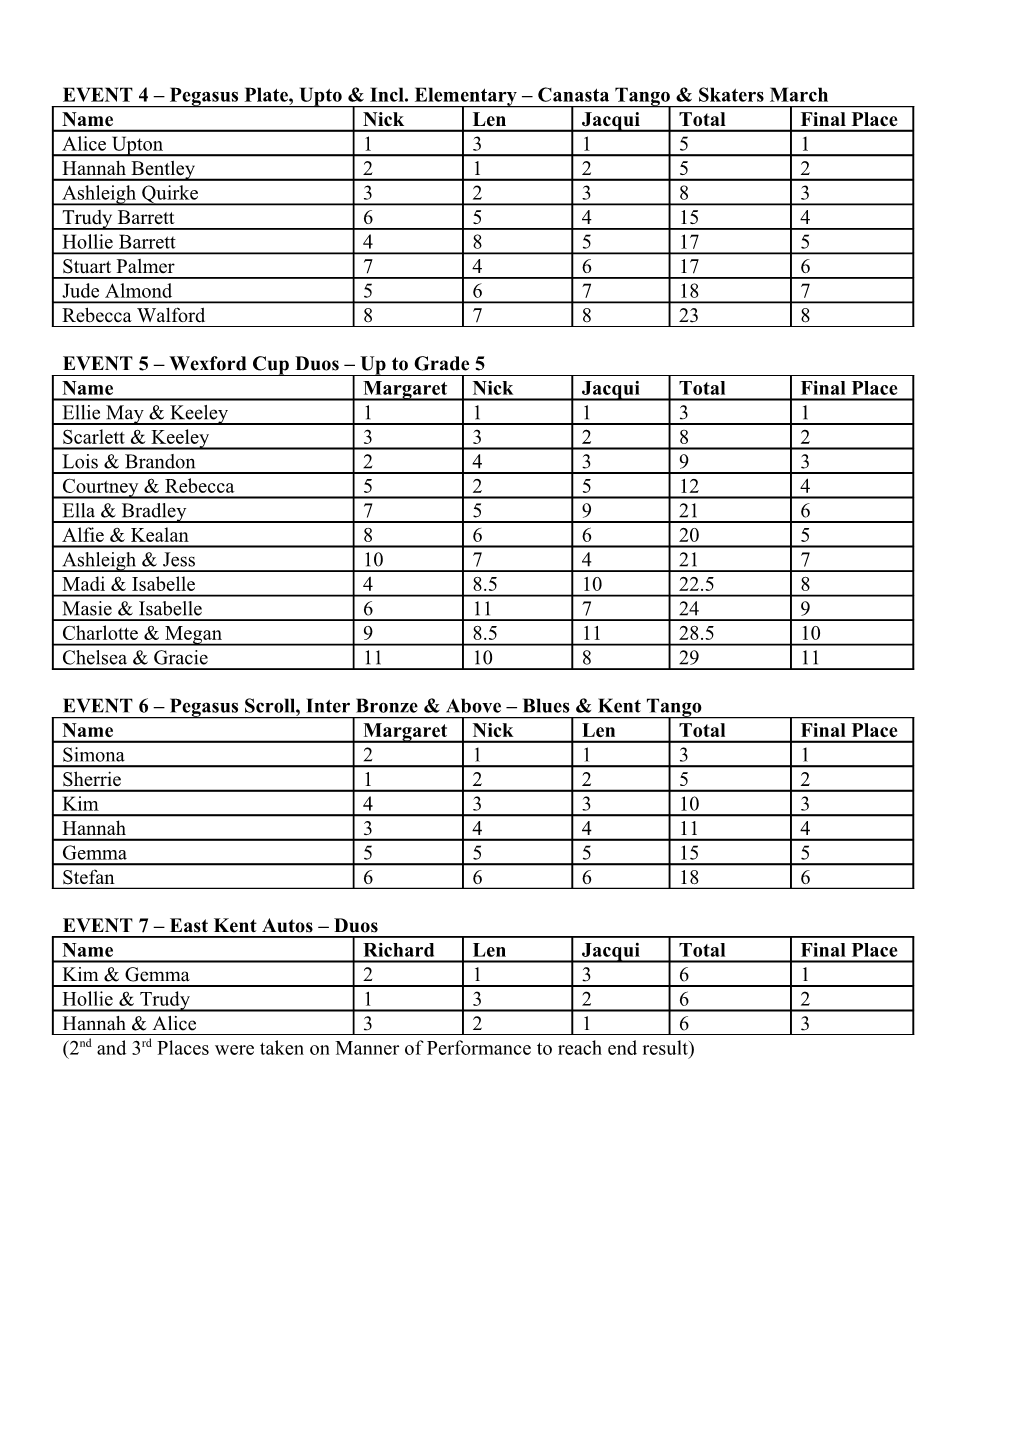 Results for Club Competitions